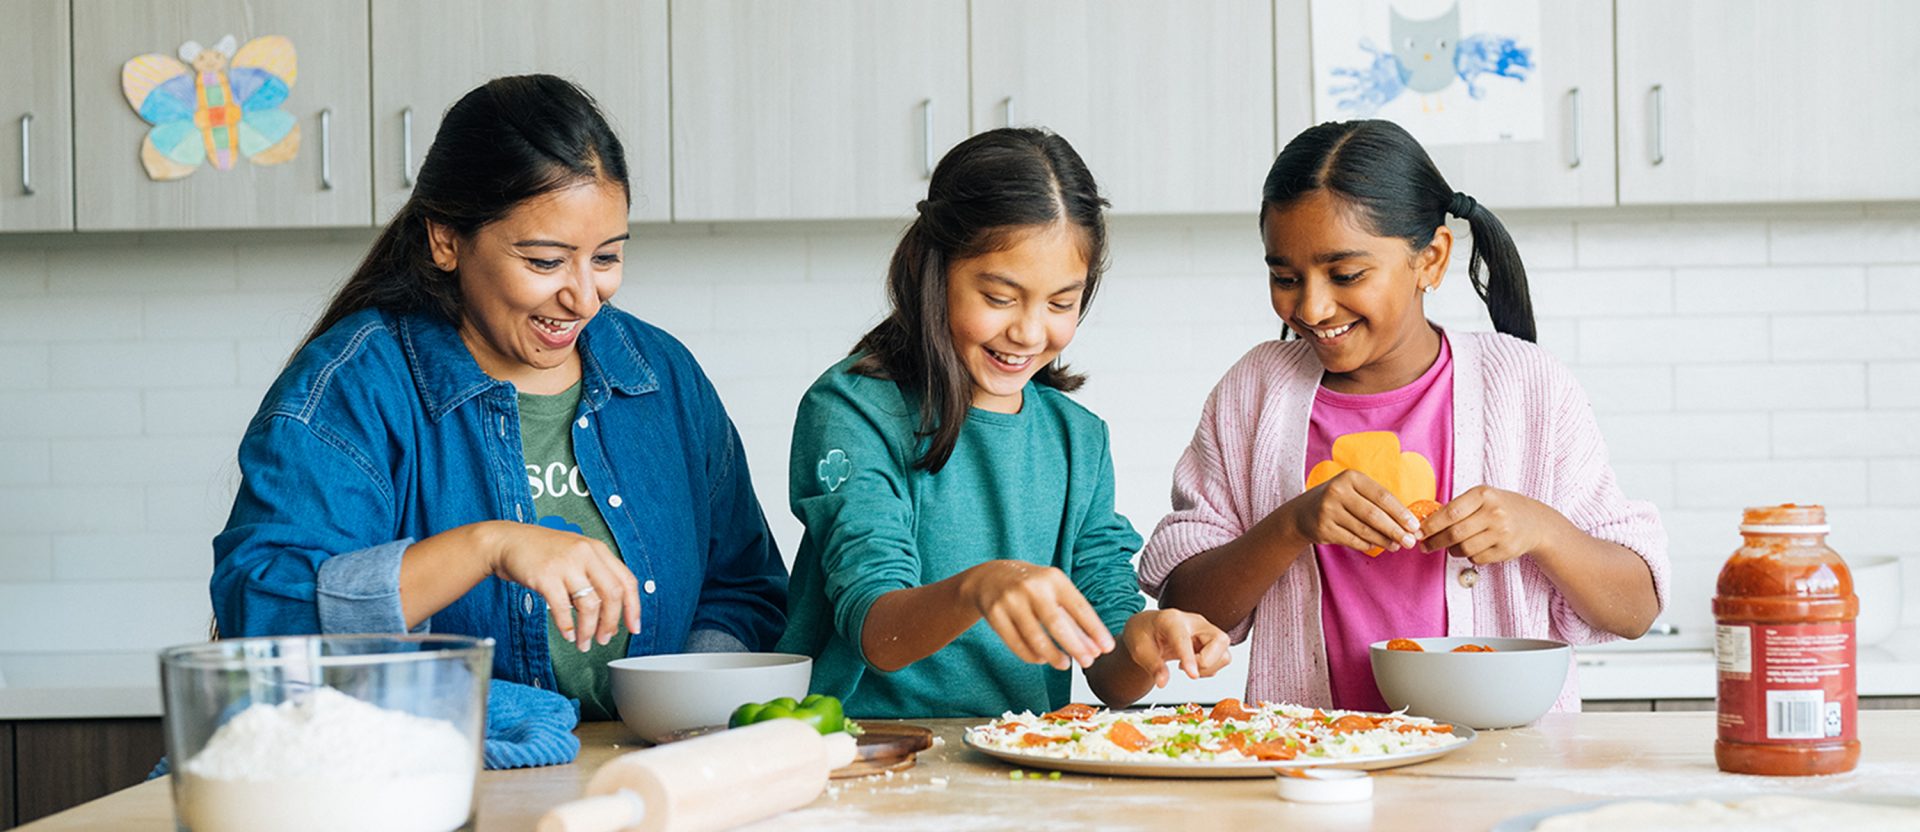 A volunteer and two Girl Scouts making pizza